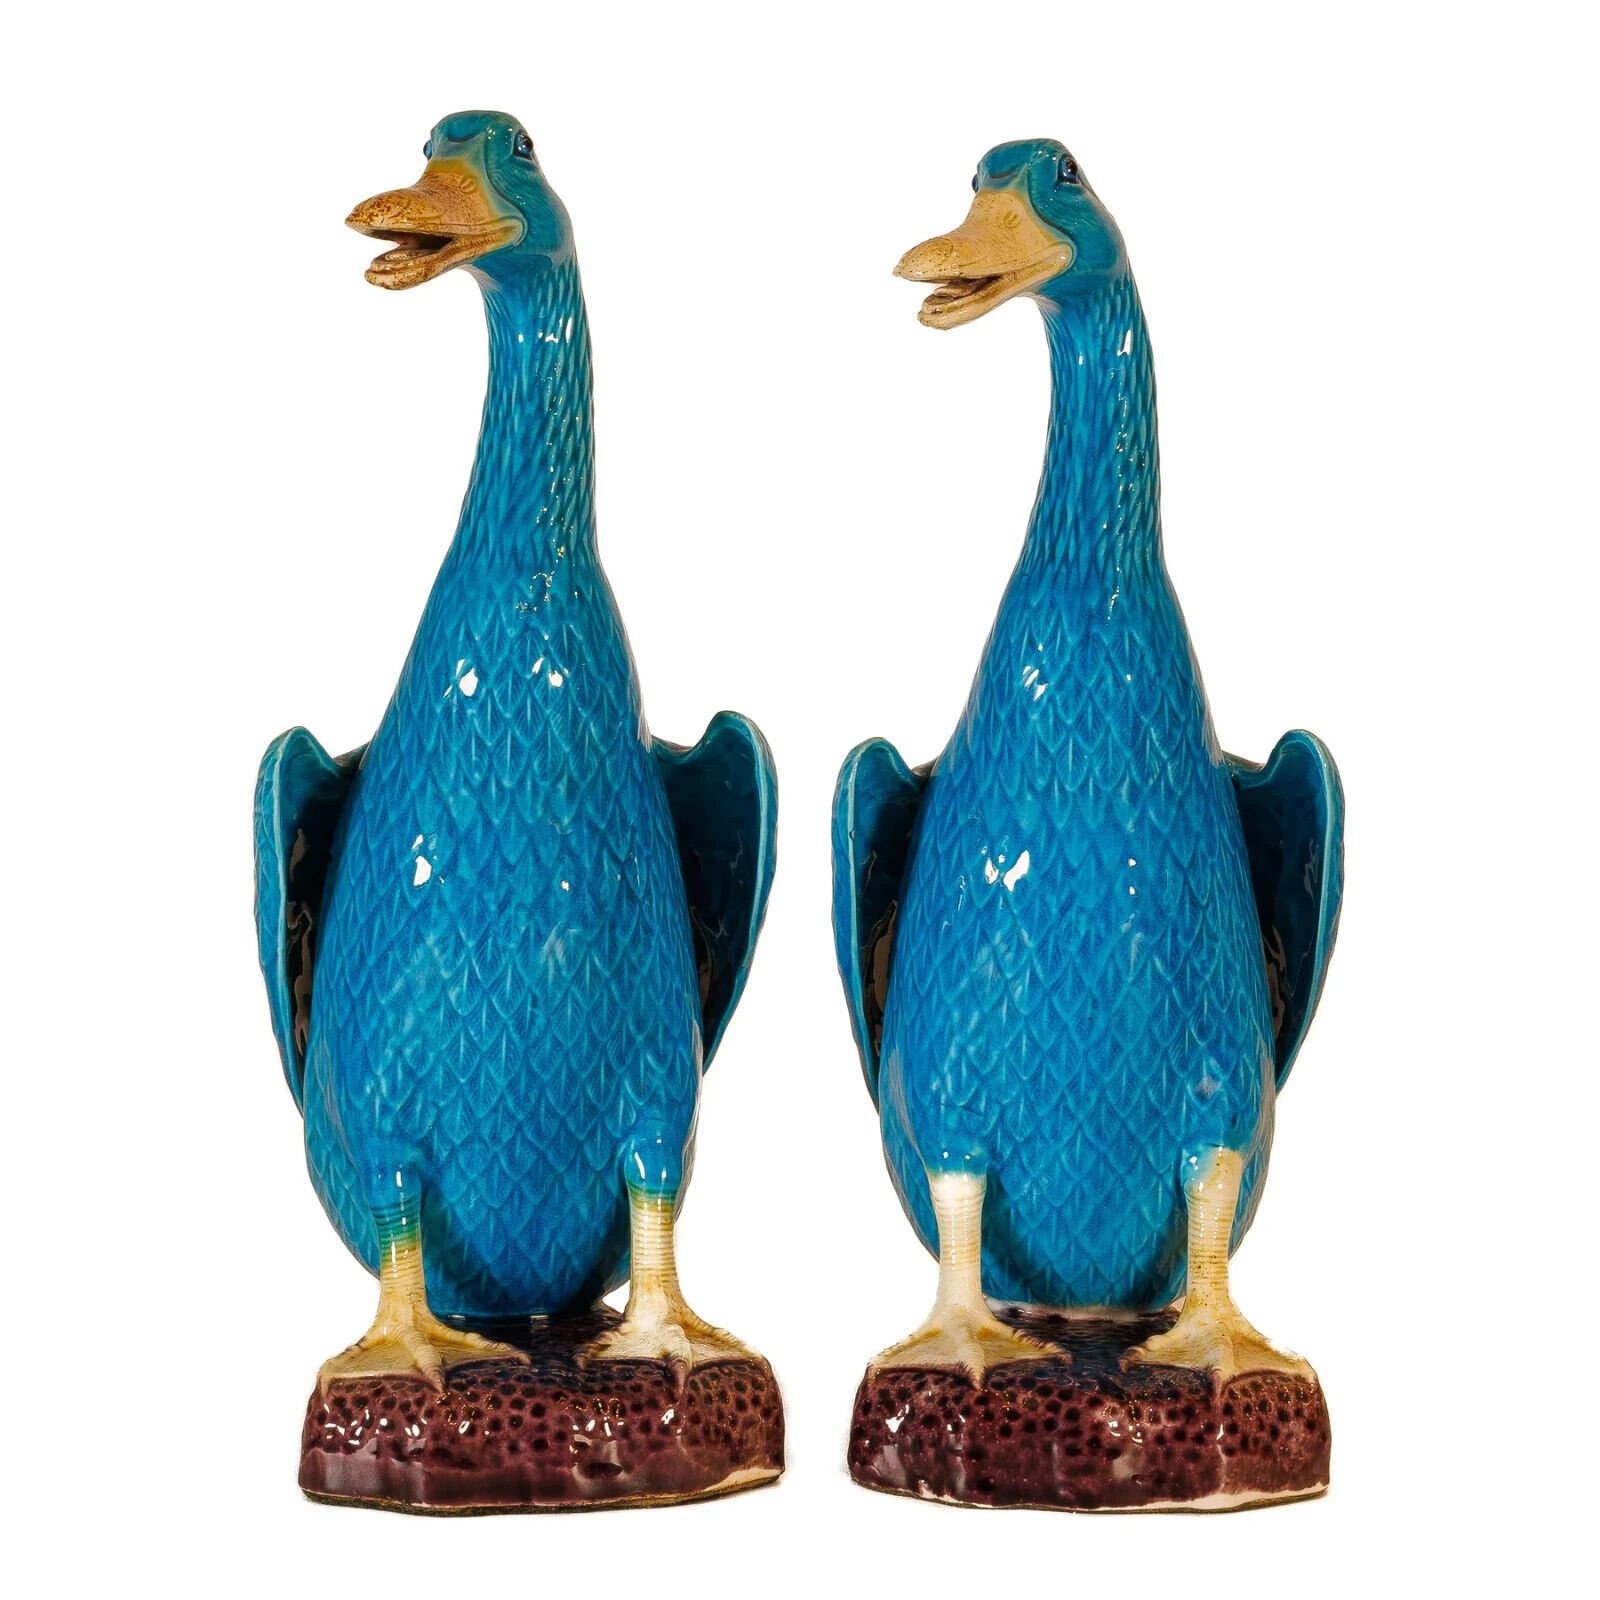 A Pair of Large 19th Century Export Glazed Chinese Turquoise Porcelain Ducks